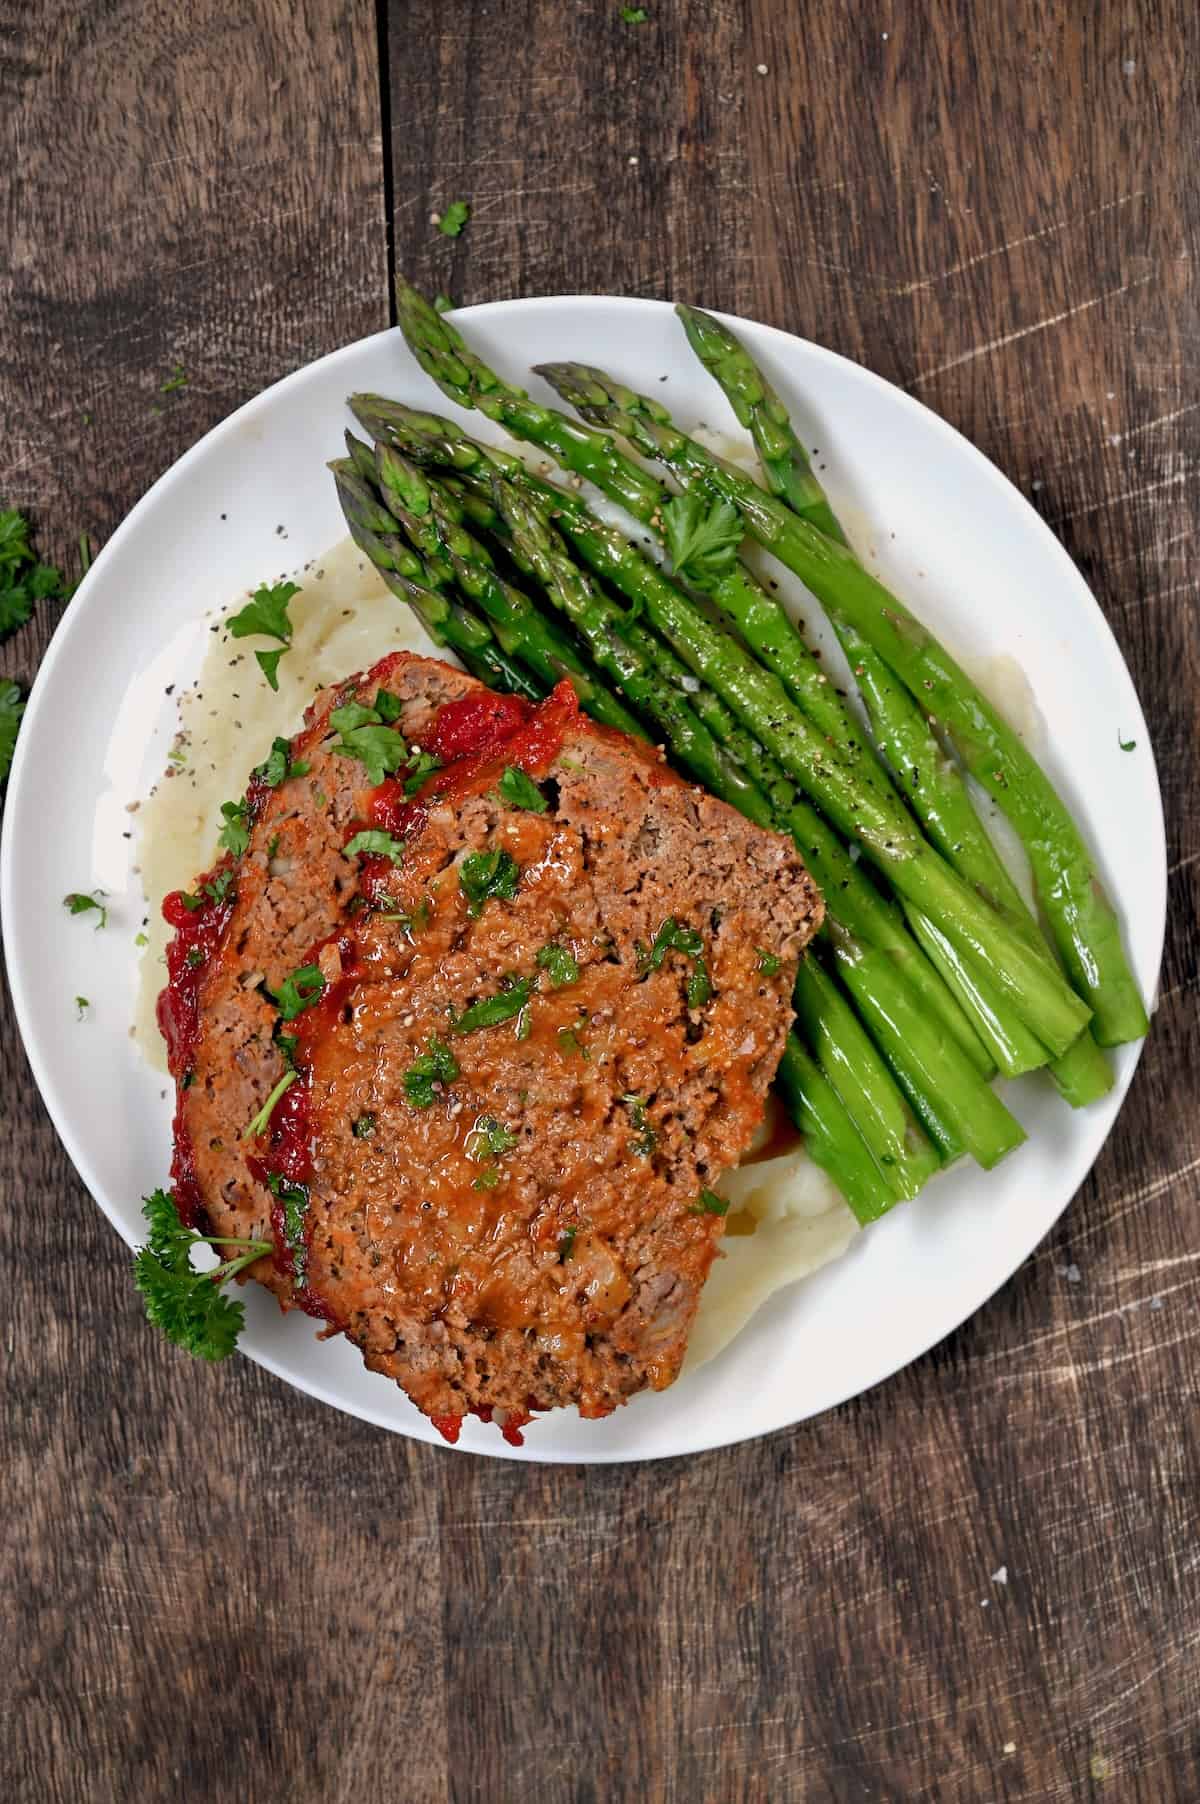 A serving of meatloaf with mashed potatoes and asparagus